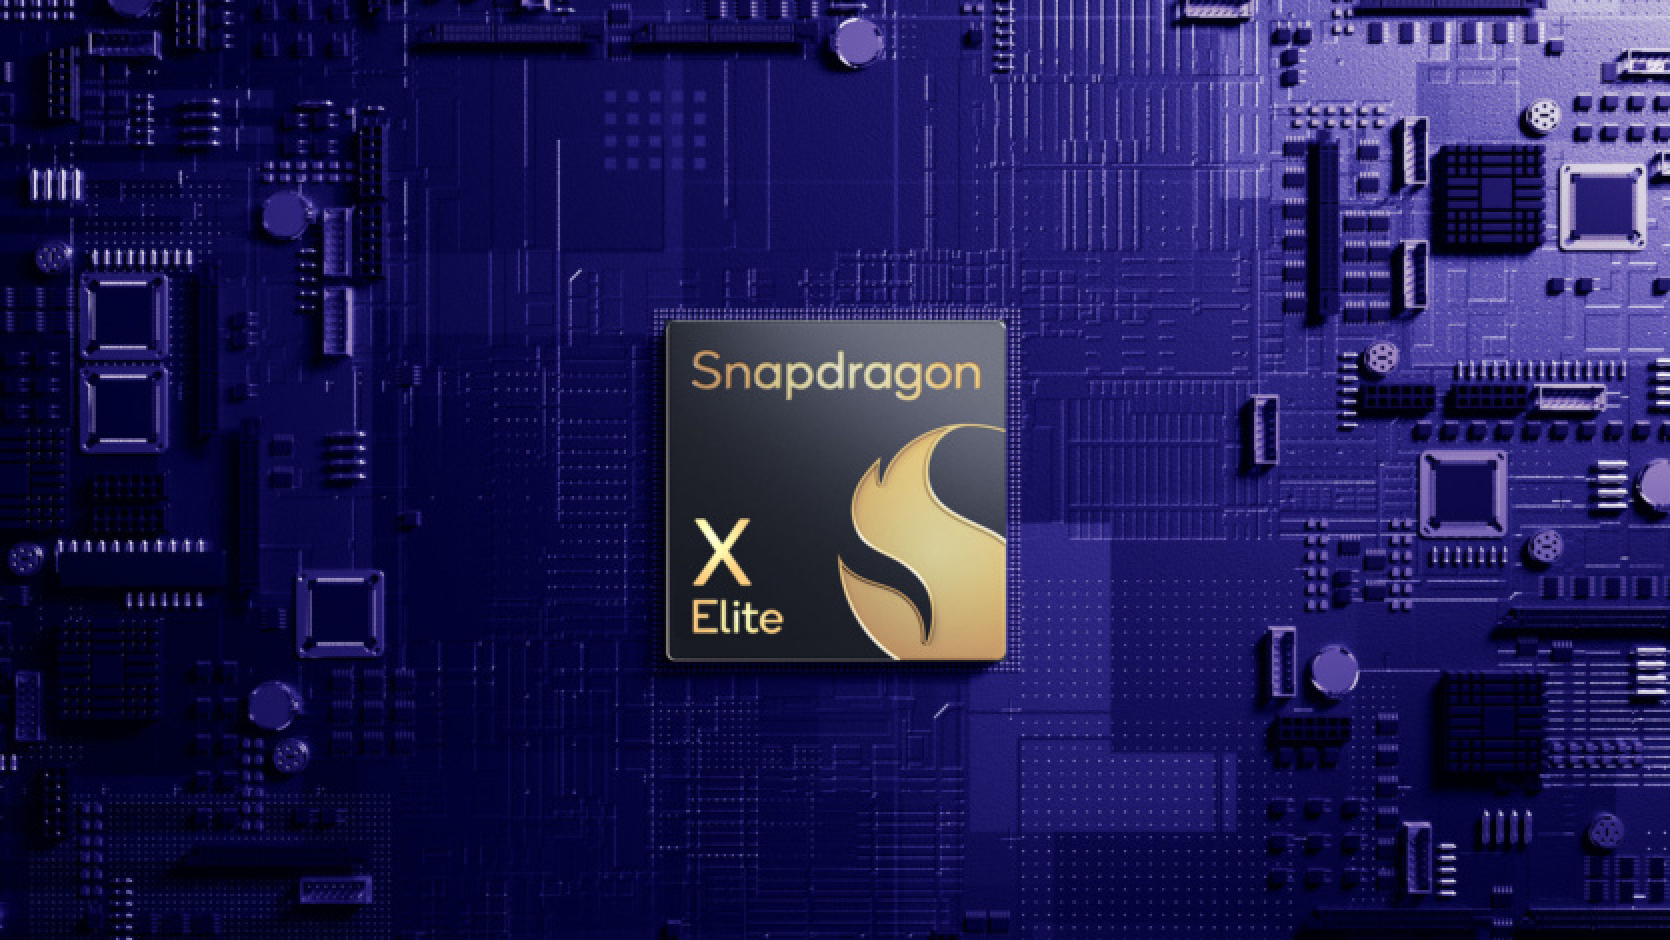 Most Windows games should "just work" on future laptops with Snapdragon processors ─ Qualcomm